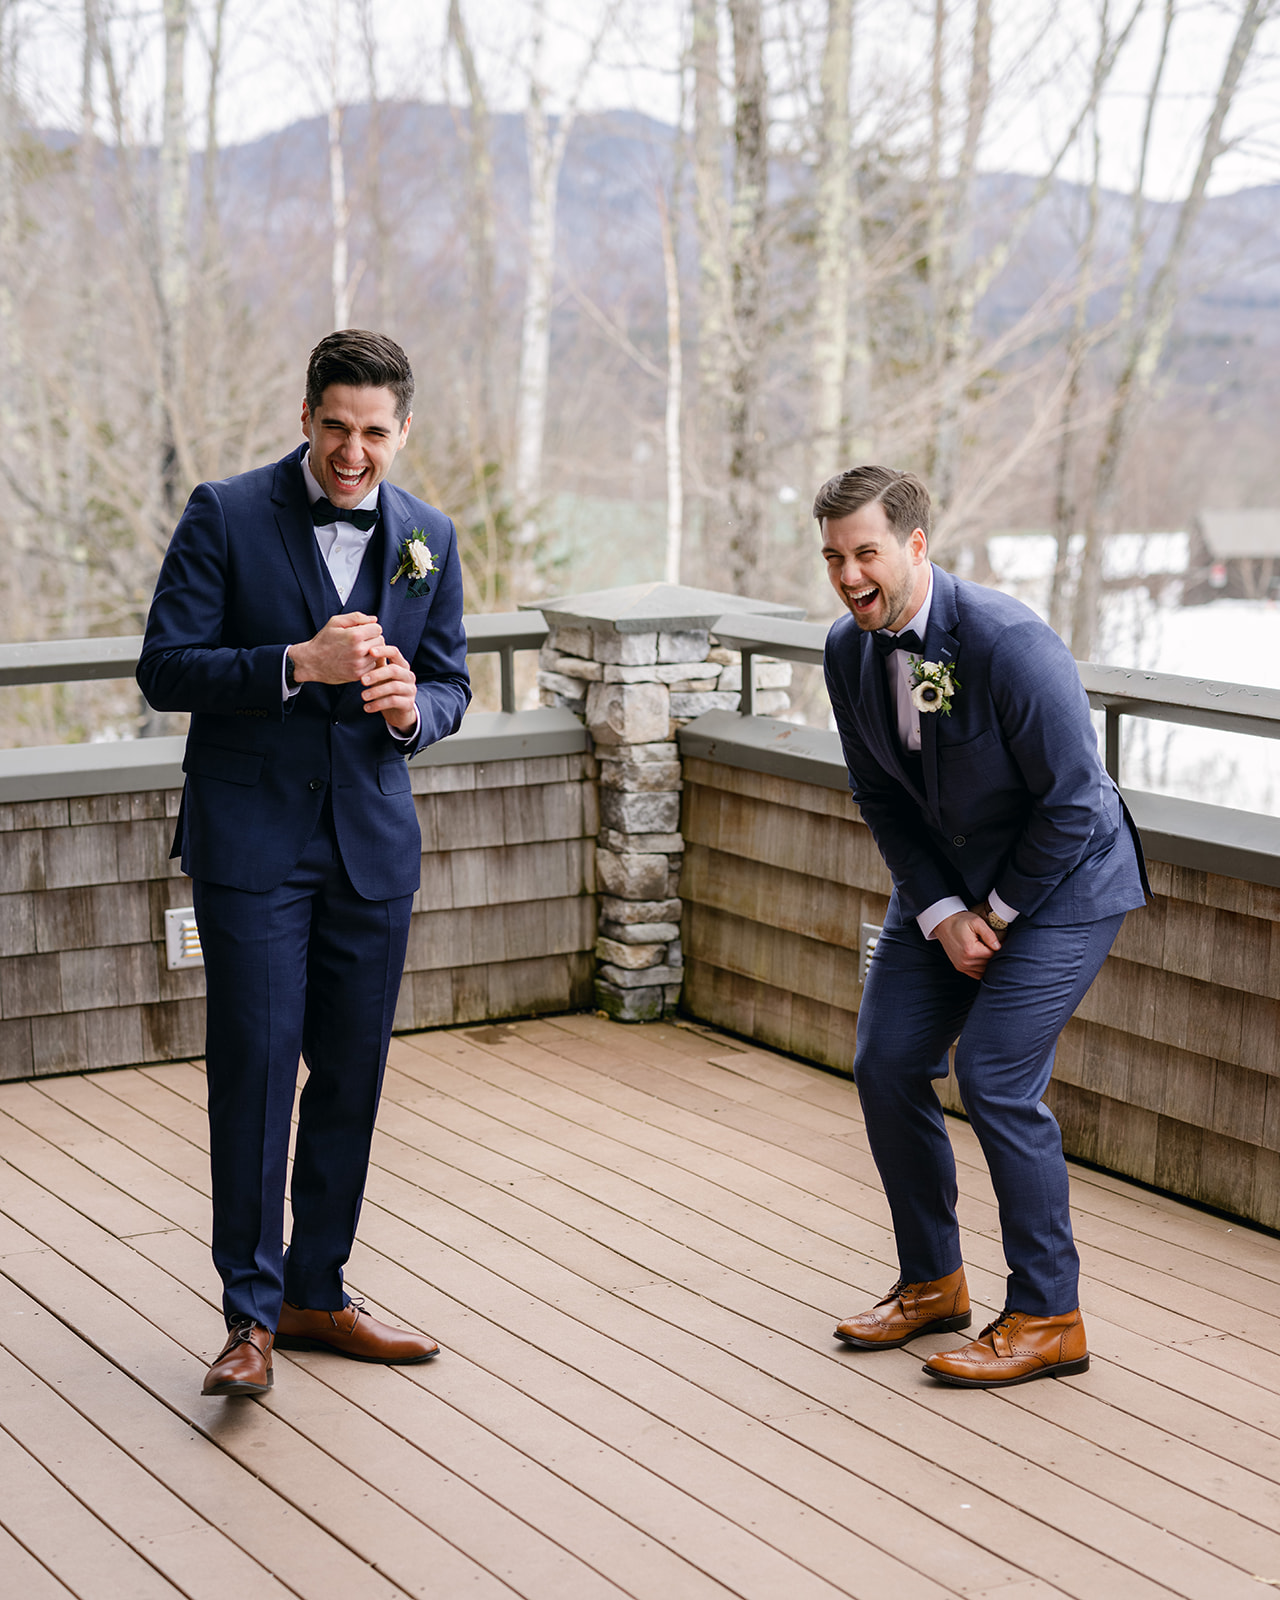 What to wear to a winter wedding in Vermont